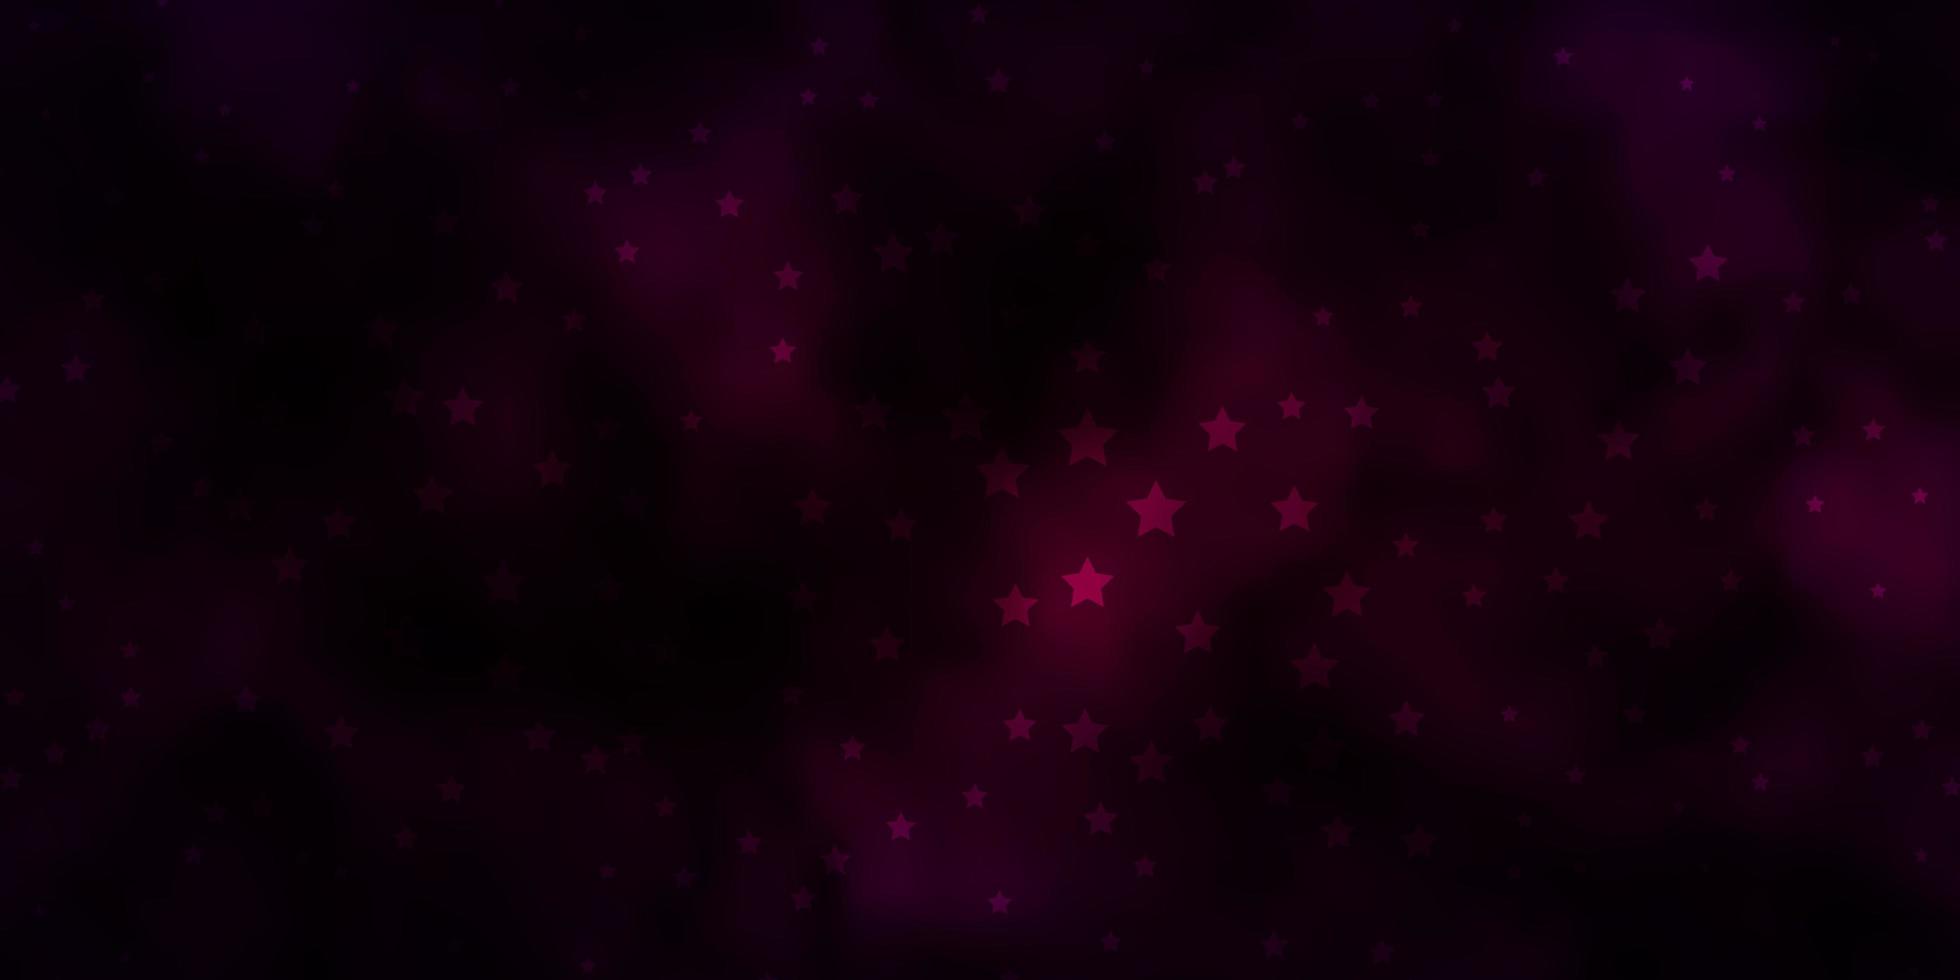 Dark Purple vector background with small and big stars.